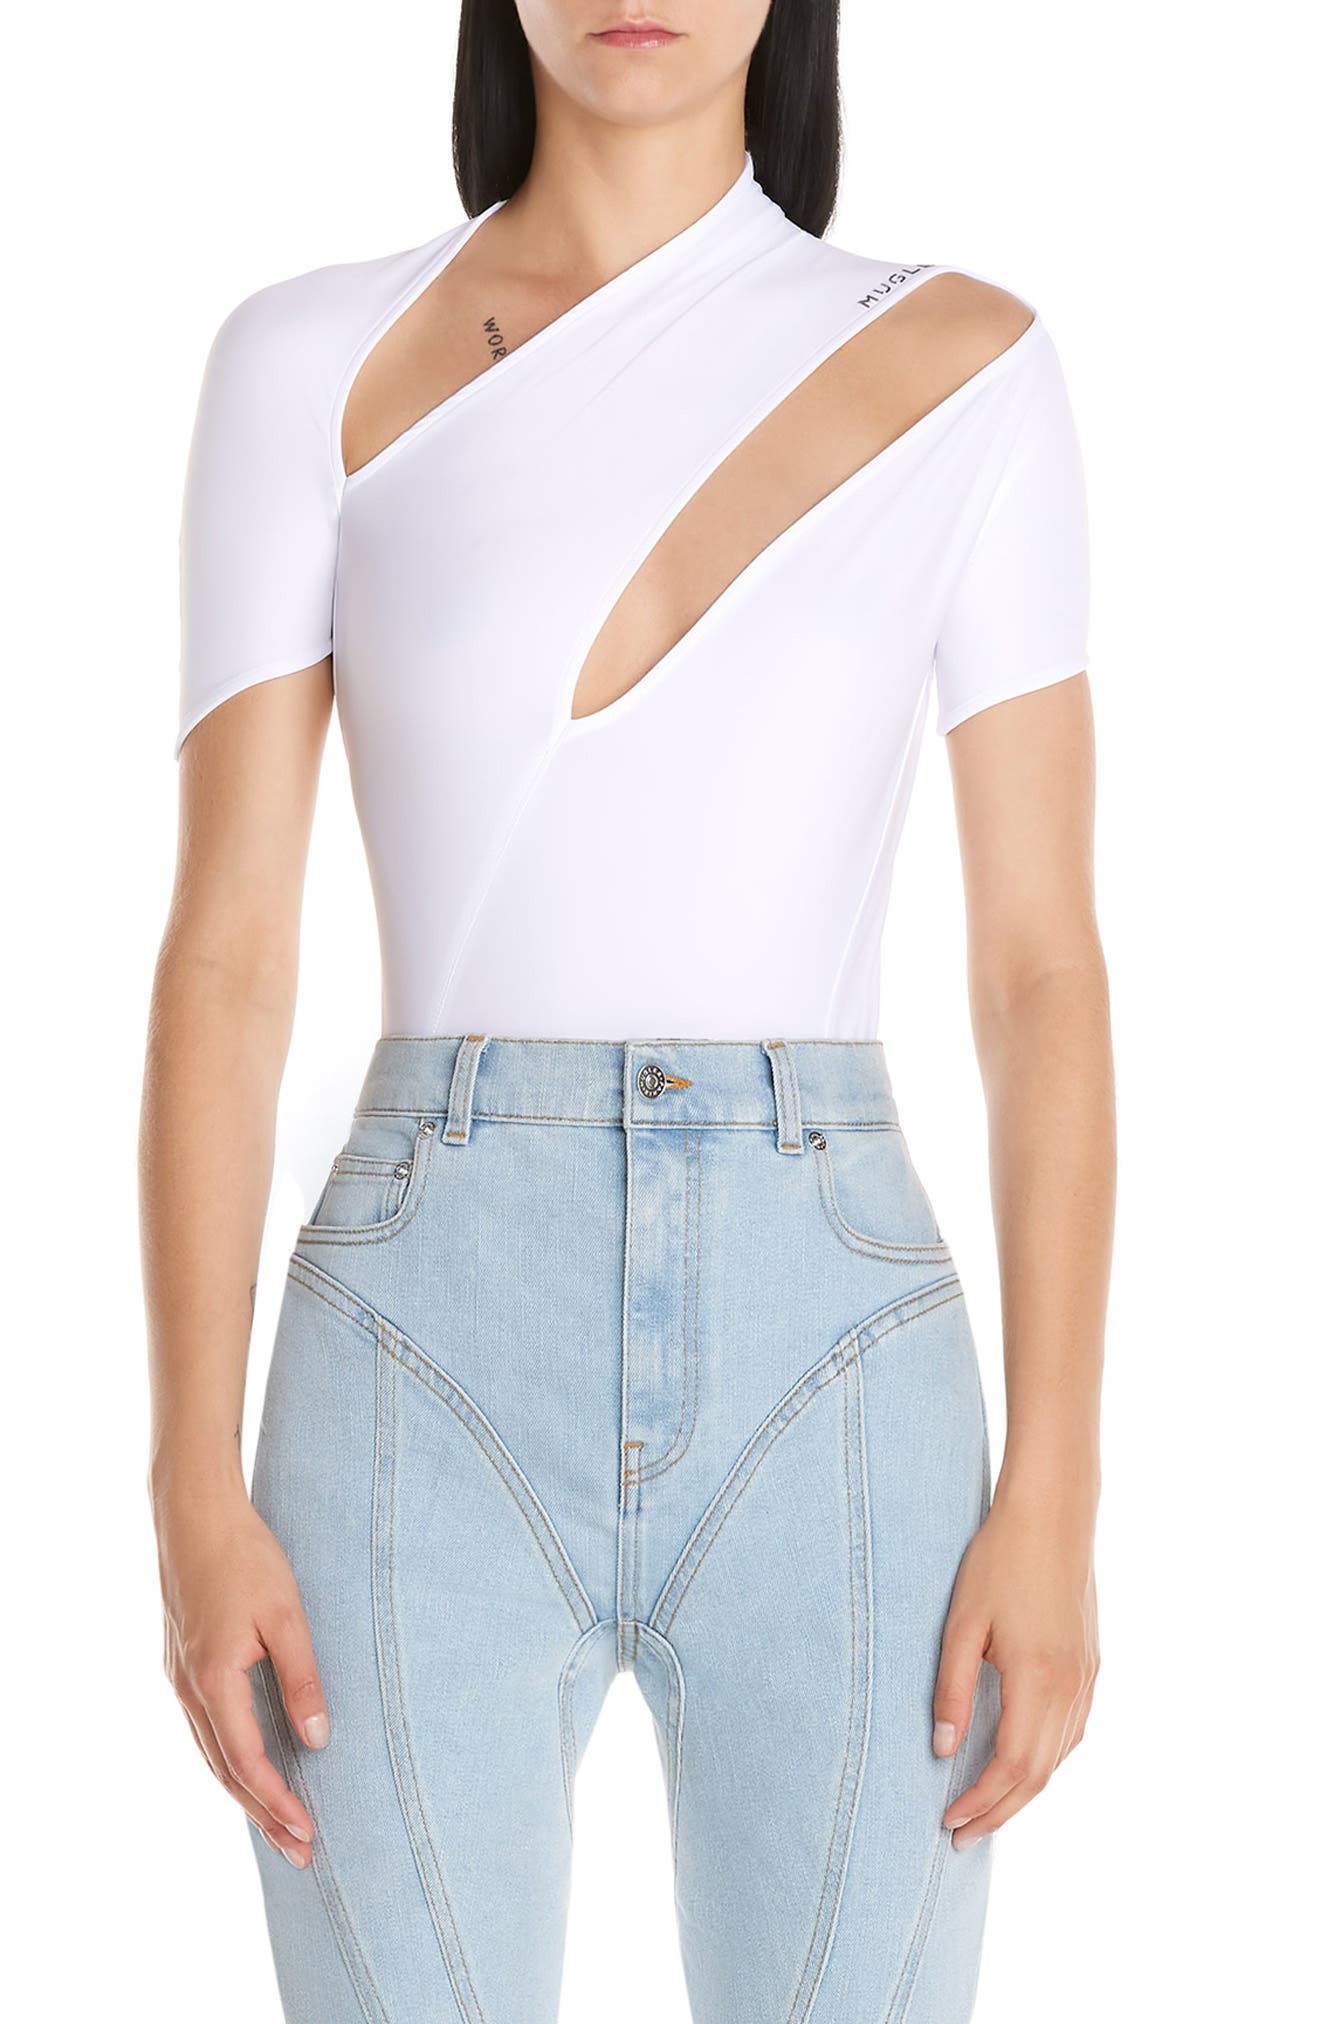 MUGLER Double Cutout Mesh Bodysuit in 1009 White at Nordstrom, Size 14 Us